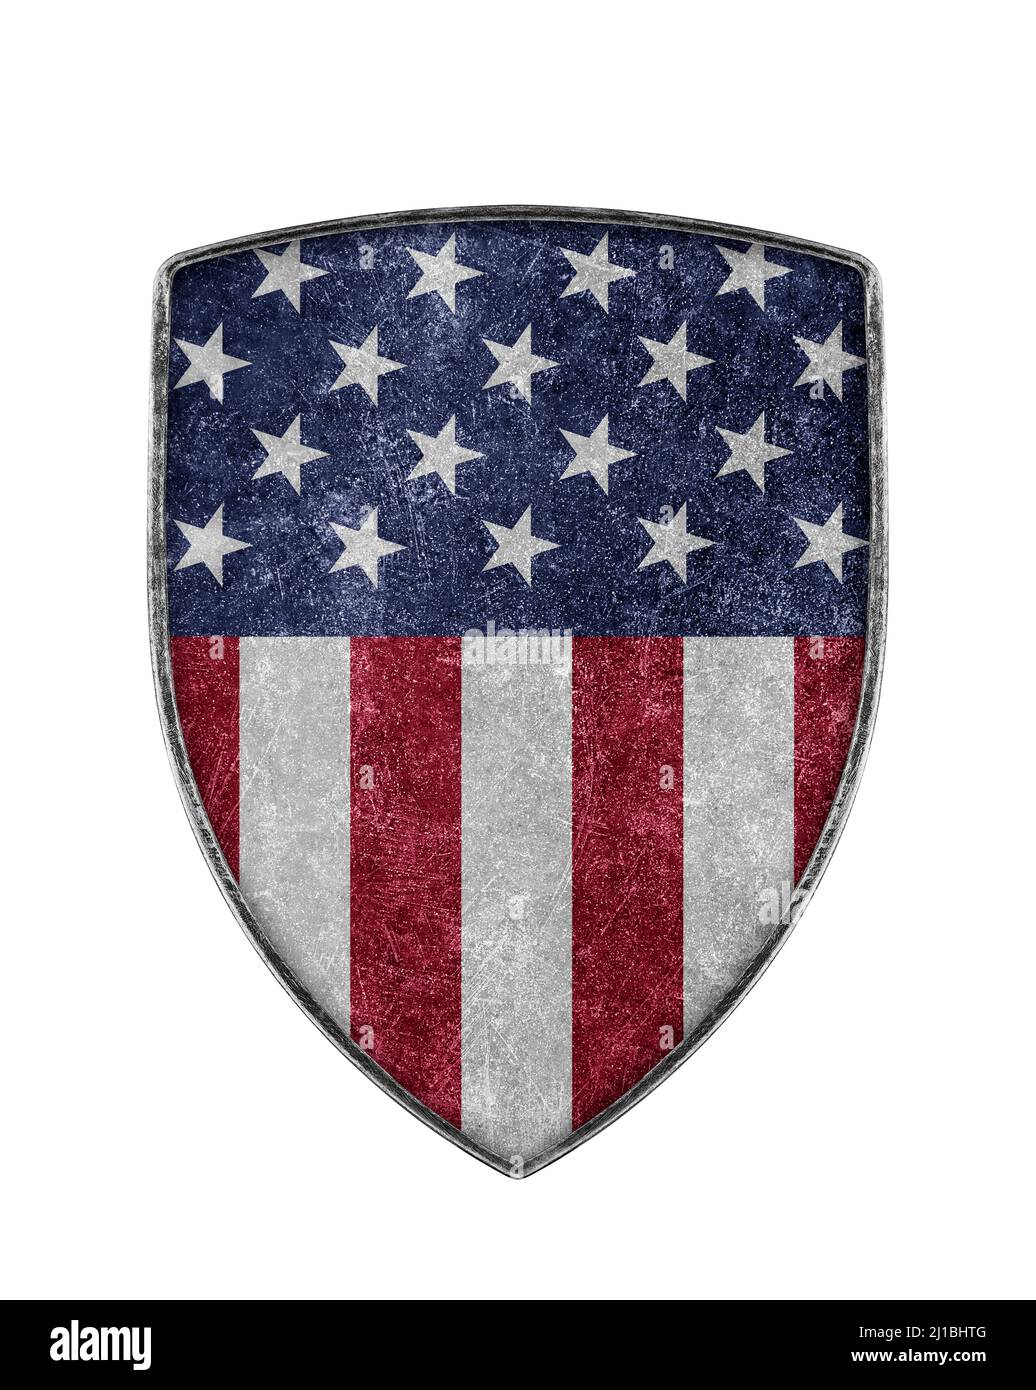 American shield with stars and stripes isolated on white background Stock Photo